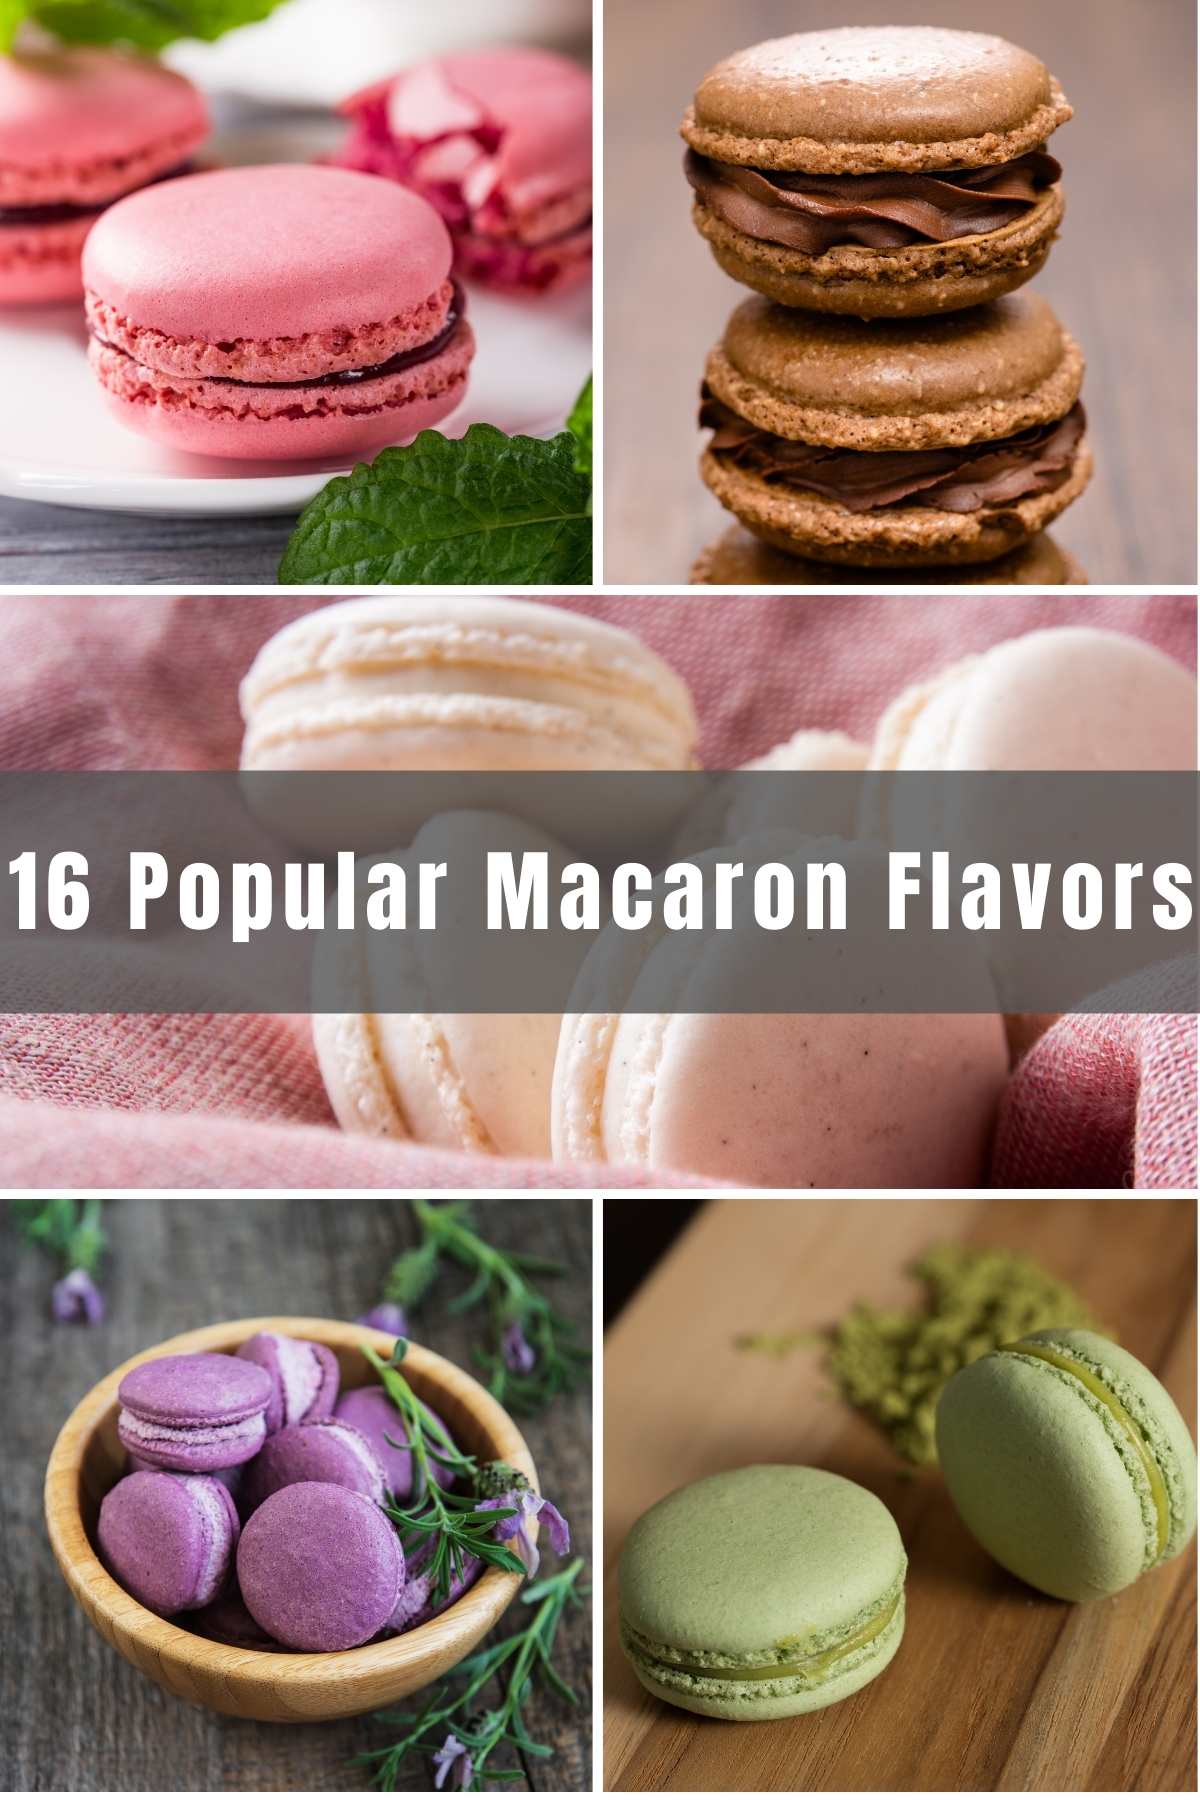 How to Flavor Macarons? 